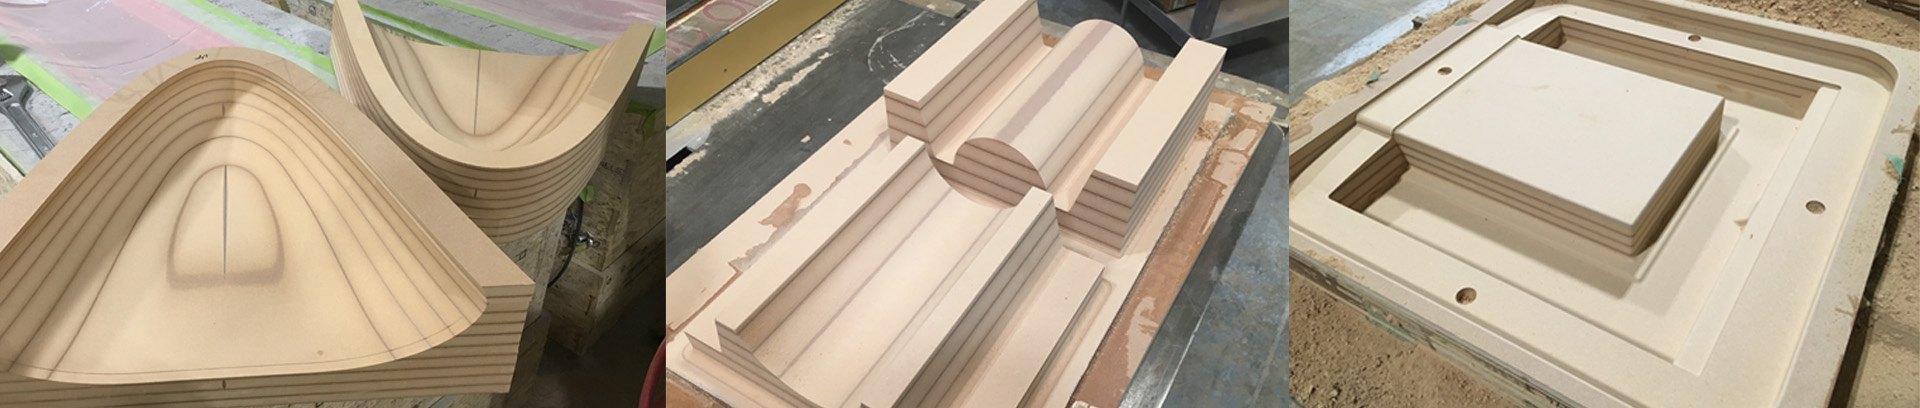 MDF plugs and molds for fiberglass and composites